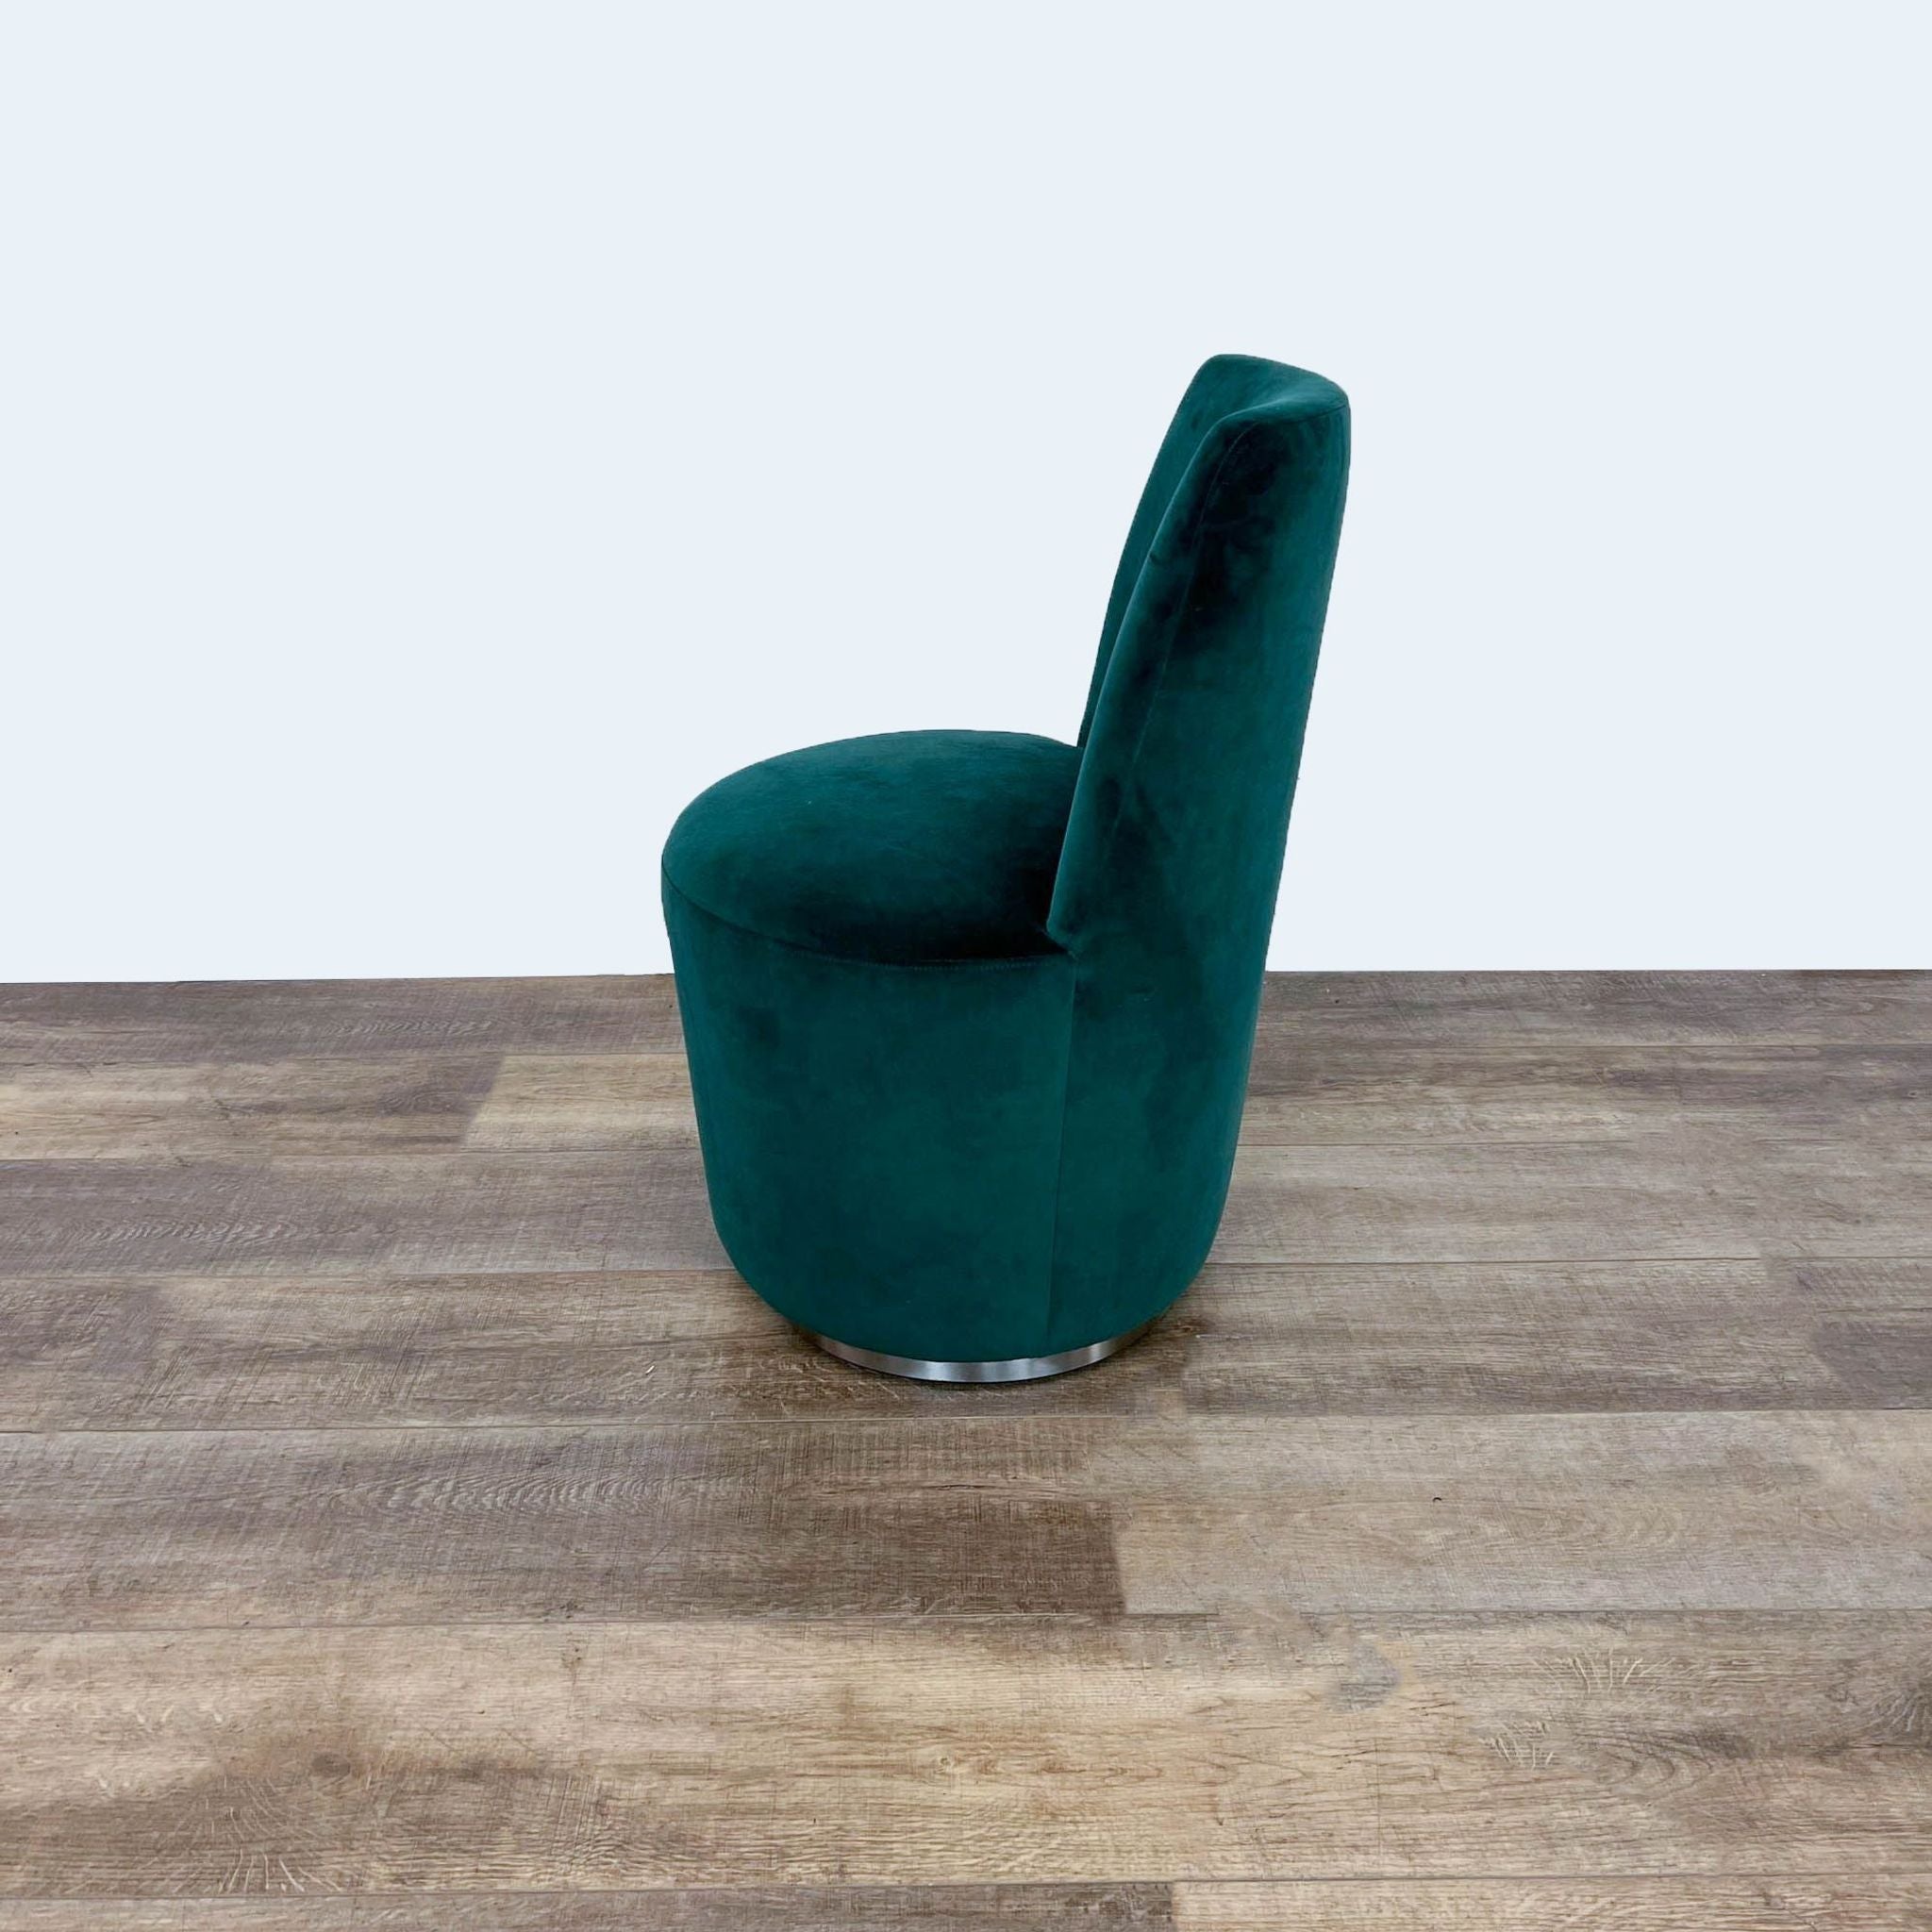 Alt text 2: Comfortable Ofelia dining chair with recessed swivel base, featuring tapered back in deep green velvet upholstery, by Crate & Barrel.